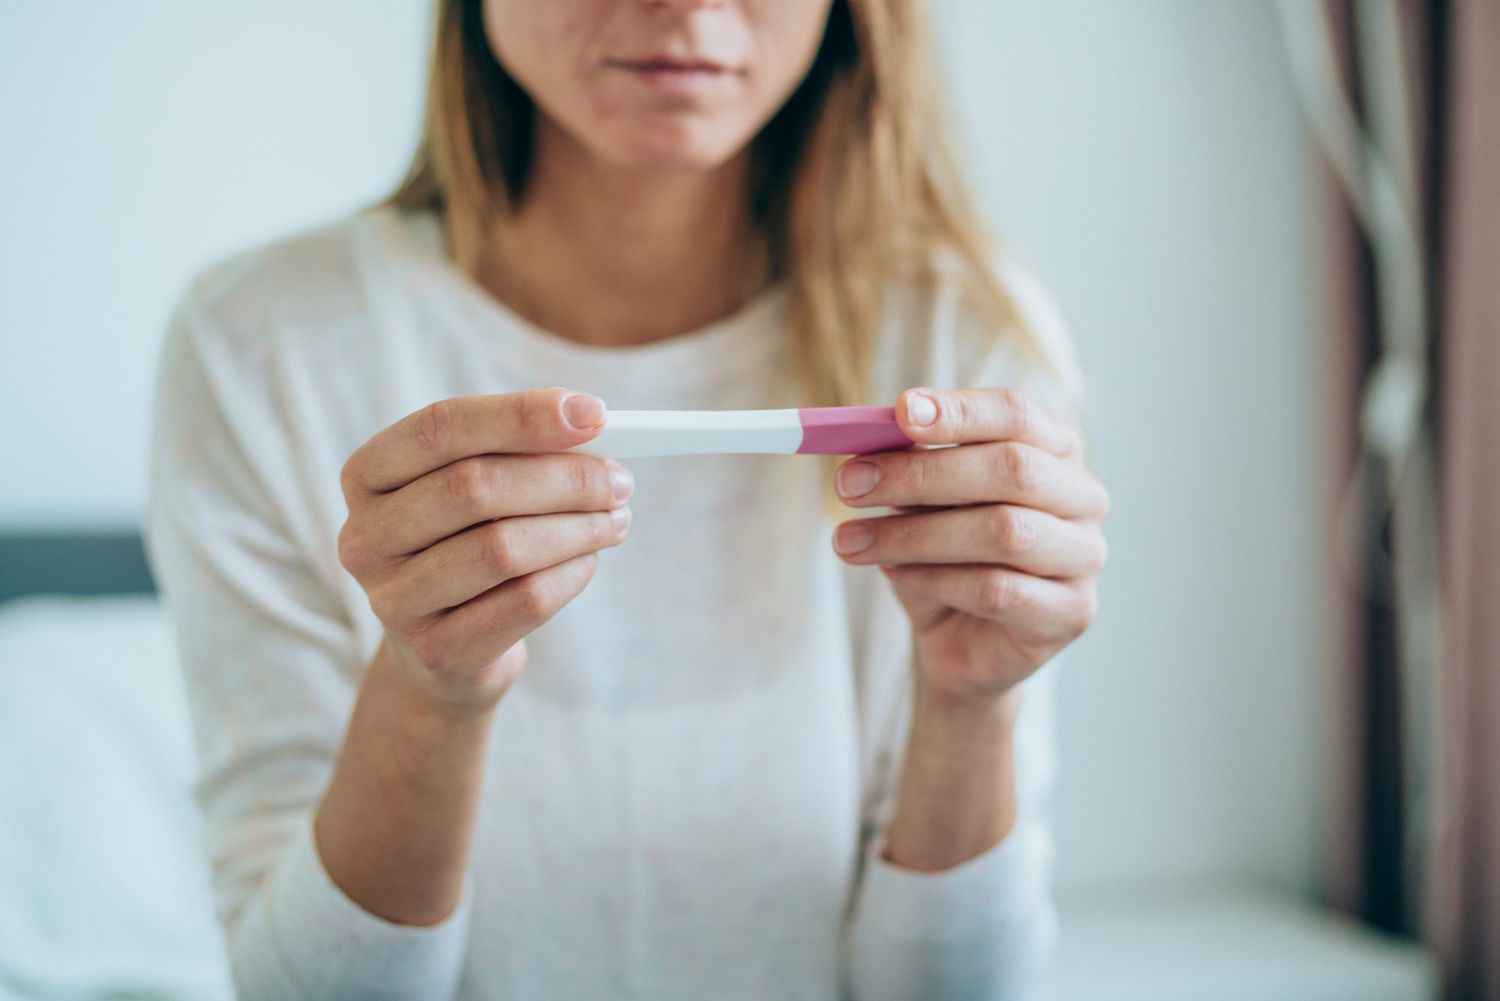 An image of a woman with a pregnancy test.